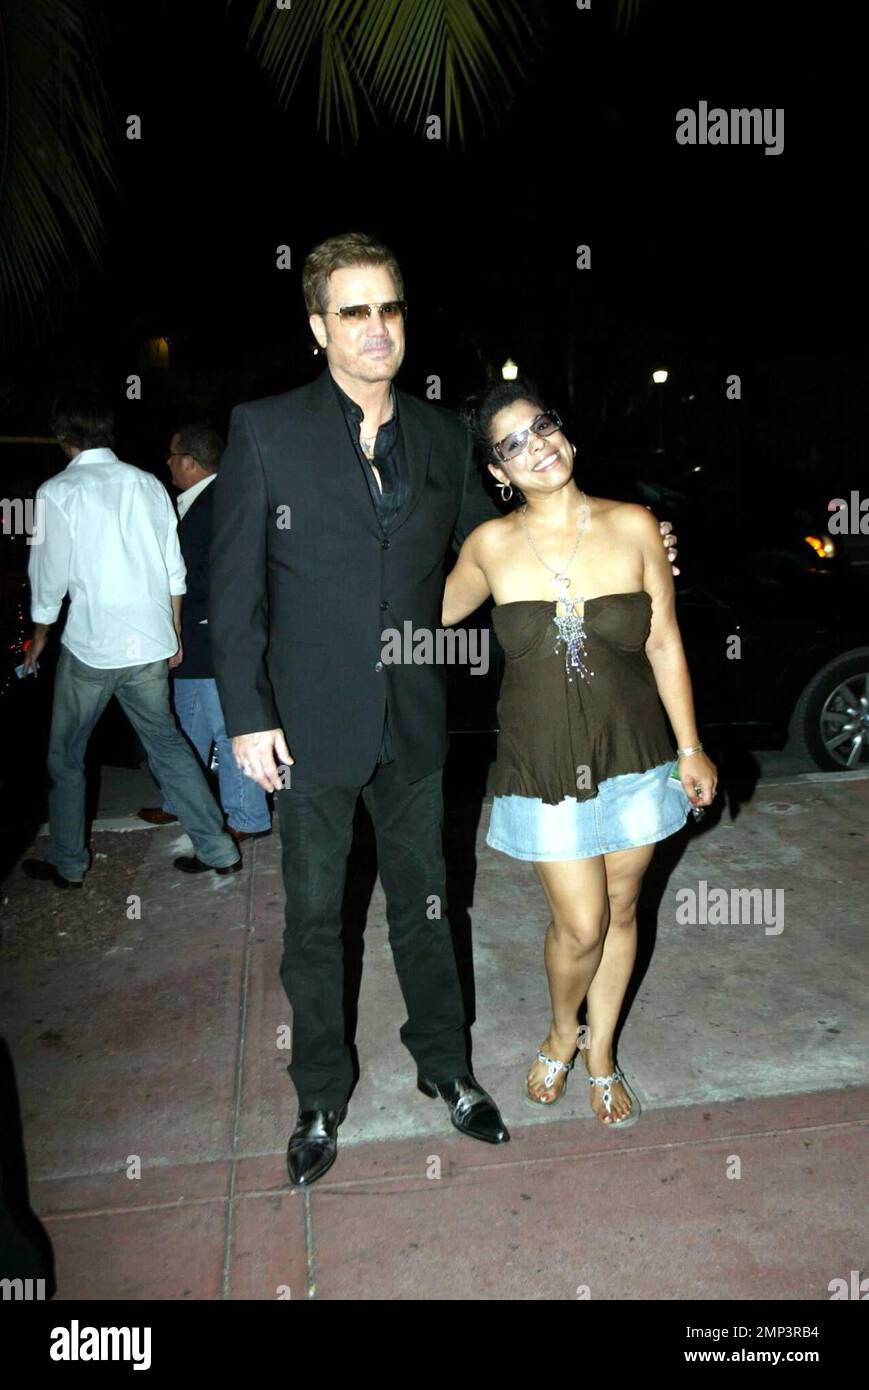 Exclusive!! Cuban singer Willy Chirino attends the release party for his new CD 'Pa' Lante' at Gem nightclub sponsored by 'Ocean Drive Espanol' and Cabana Cachasa Mojitos and Spirits. Miami, FL 6/6/08. Stock Photo